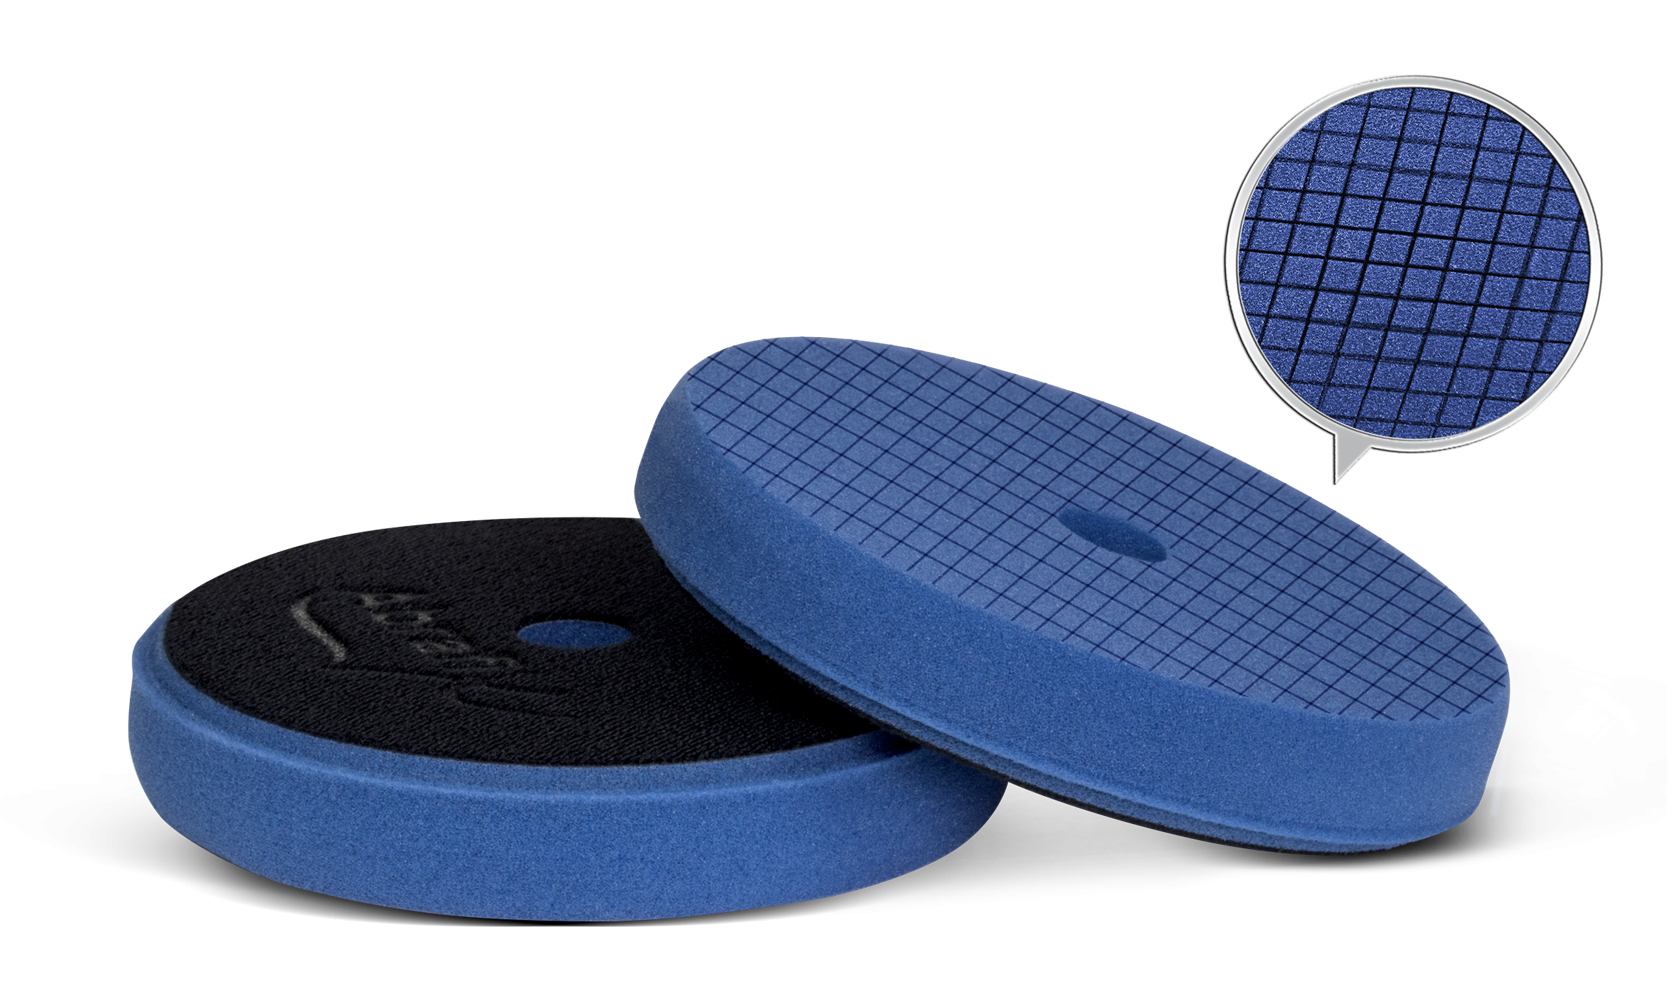 SCHOLL CONCEPTS SpiderPad navy-blue M 145/25 mm